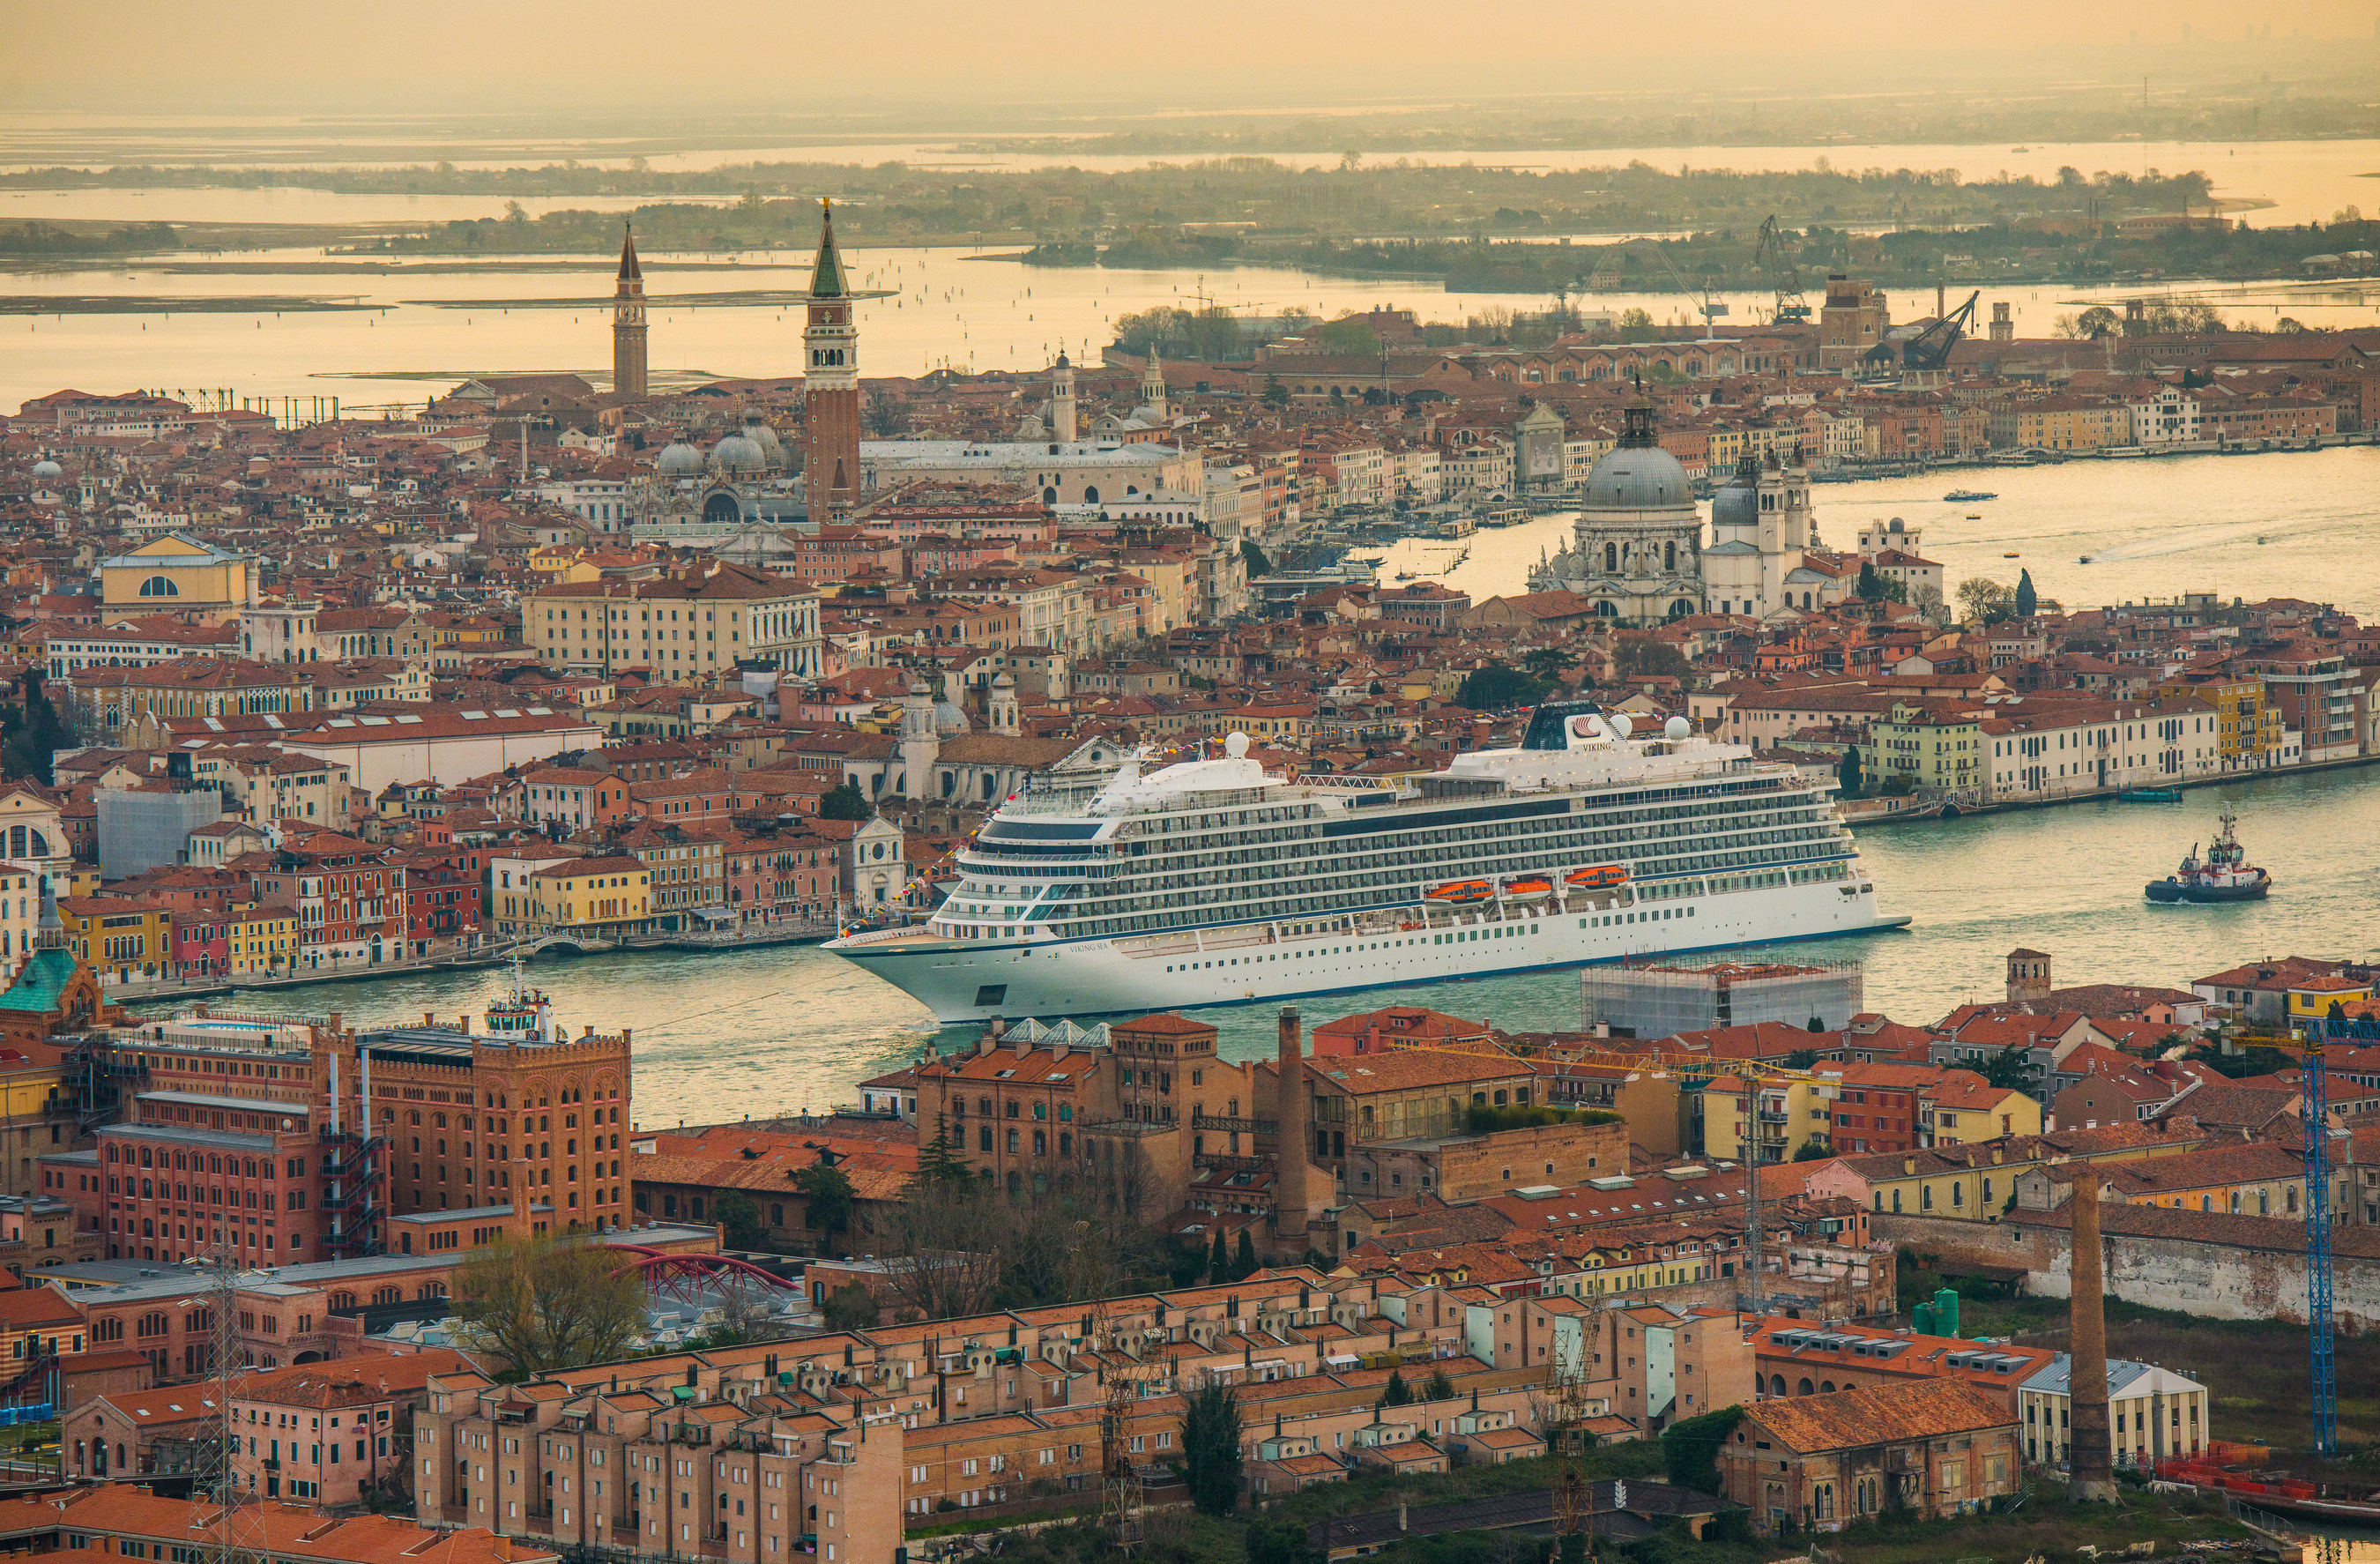 Viking Sea, the second ship from Viking Ocean Cruises, seen arriving in Venice, Italy. The 930-passenger ship is now on its maiden voyage and will be officially christened in London on May 5. Visit www.vikingoceancruises.com for more information.